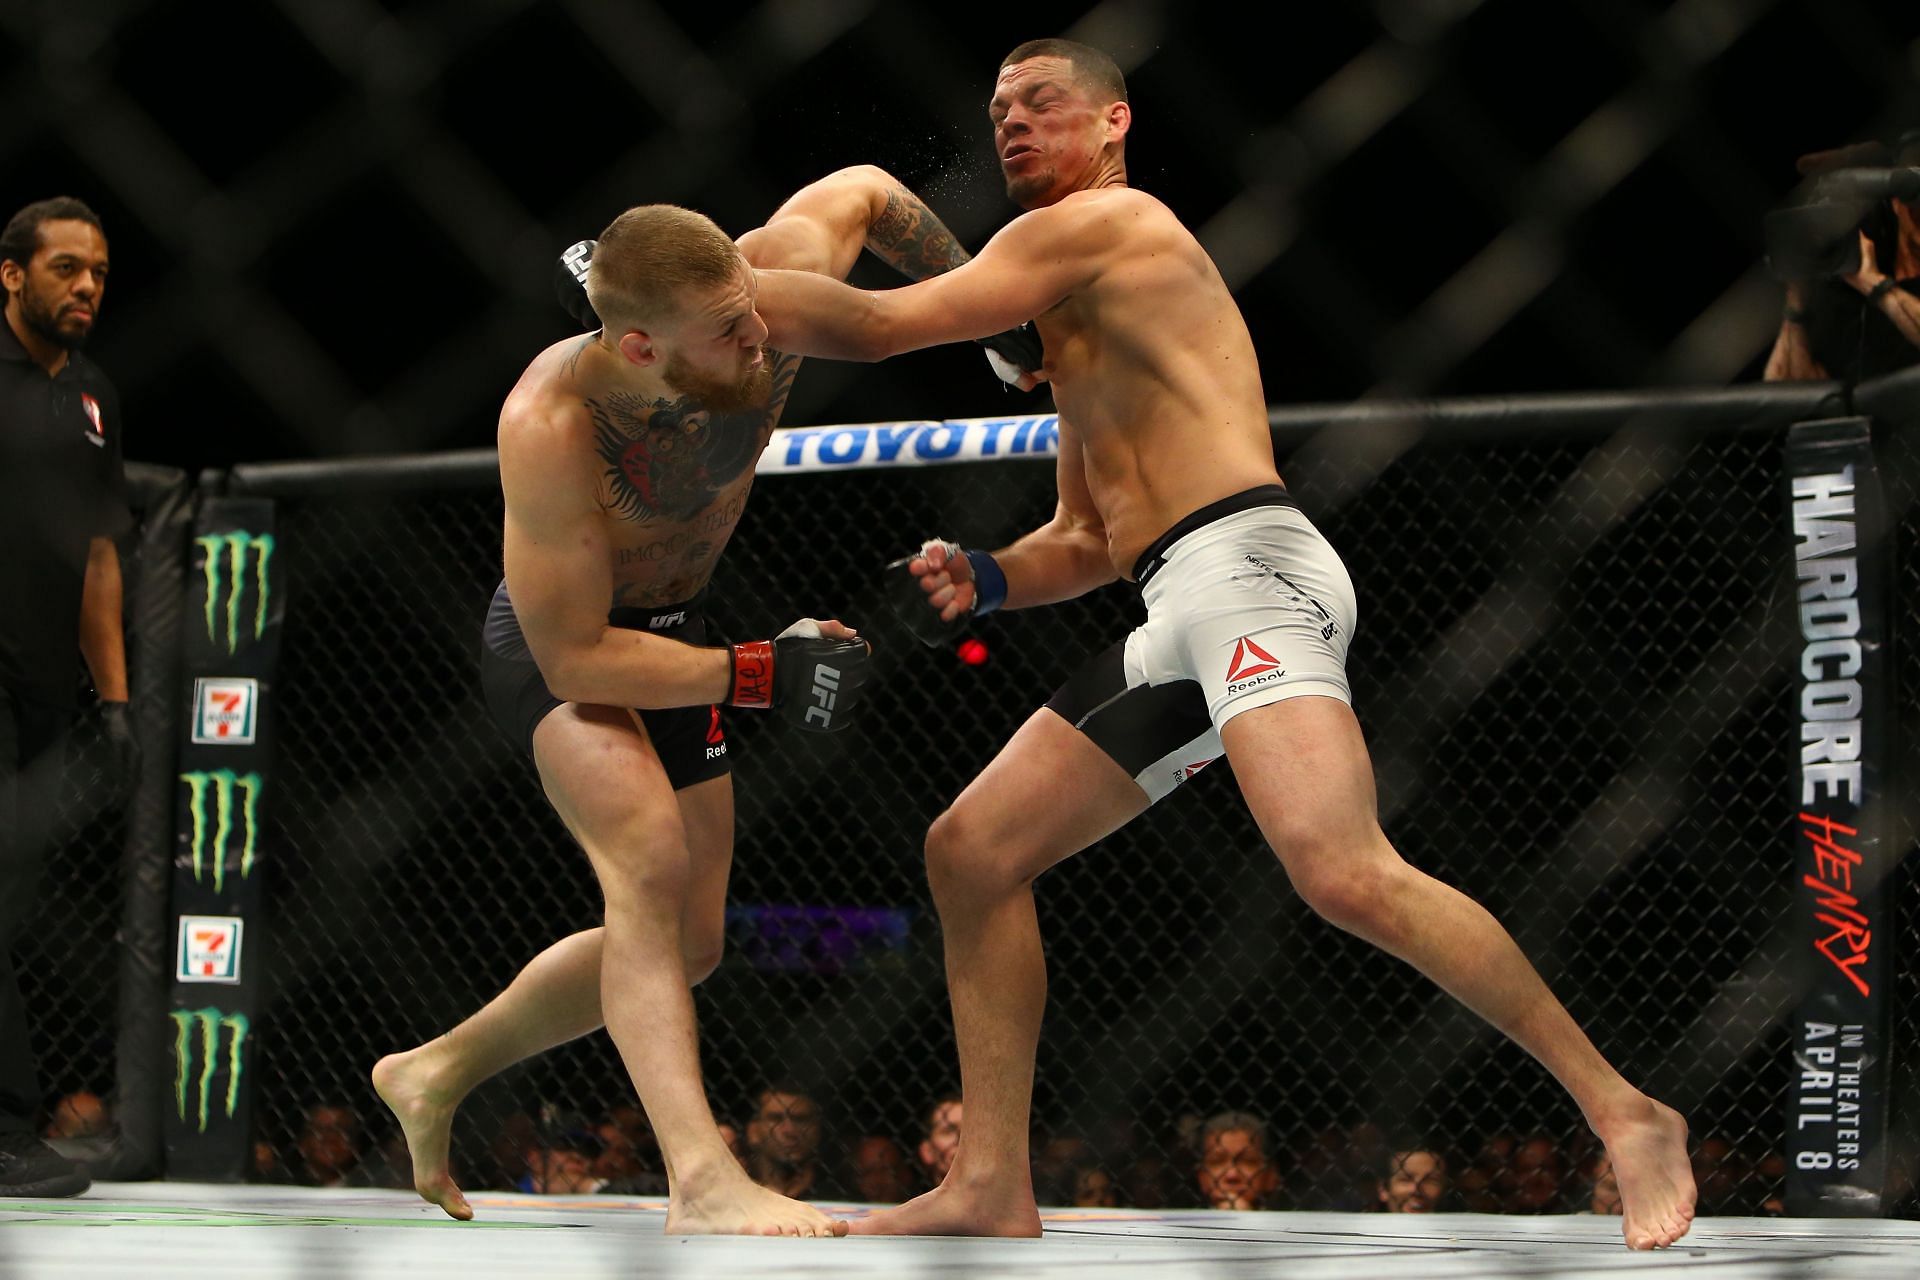 Conor McGregor&#039;s long-awaited third bout with Nate Diaz could headline any UFC event